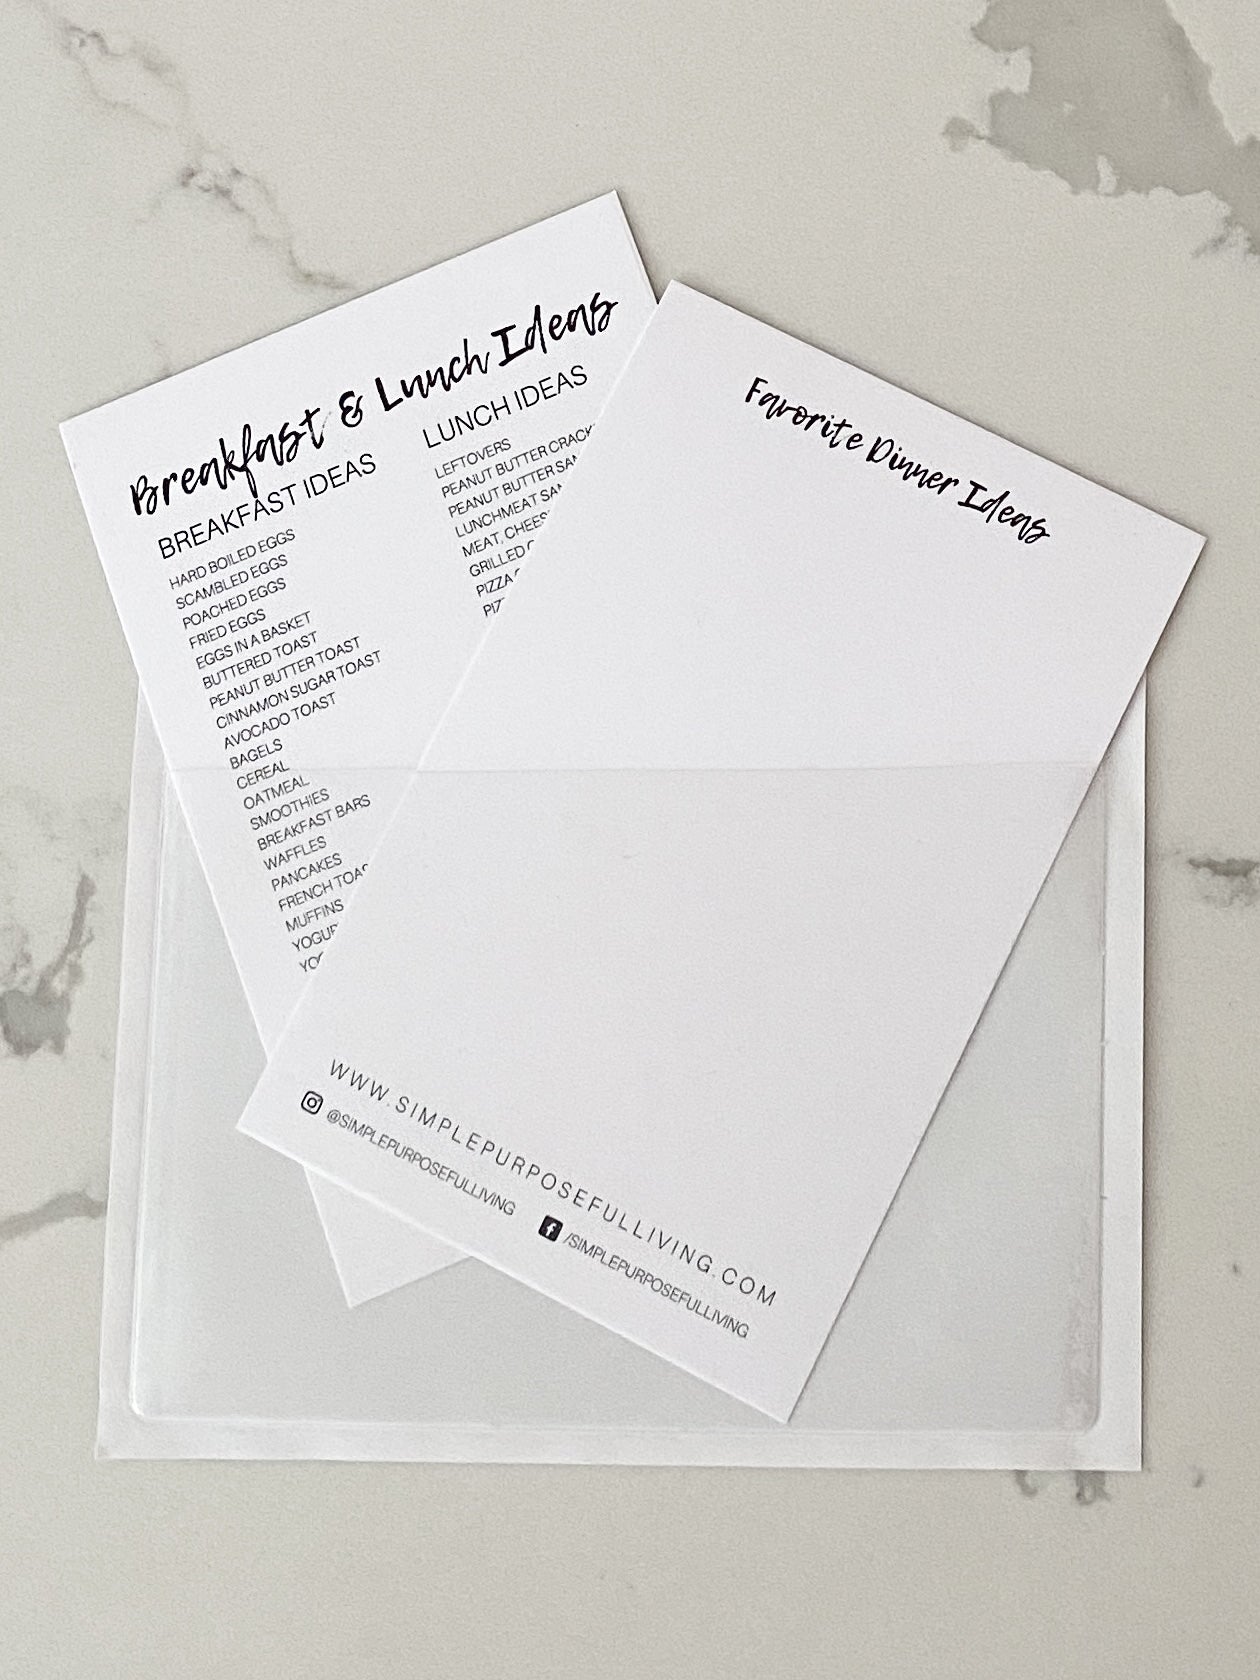 recipe card hold meal planner accessory kit is included in the complete meal planning bundle by Simple Purposeful Living.  Perfect for weekly meal planning.